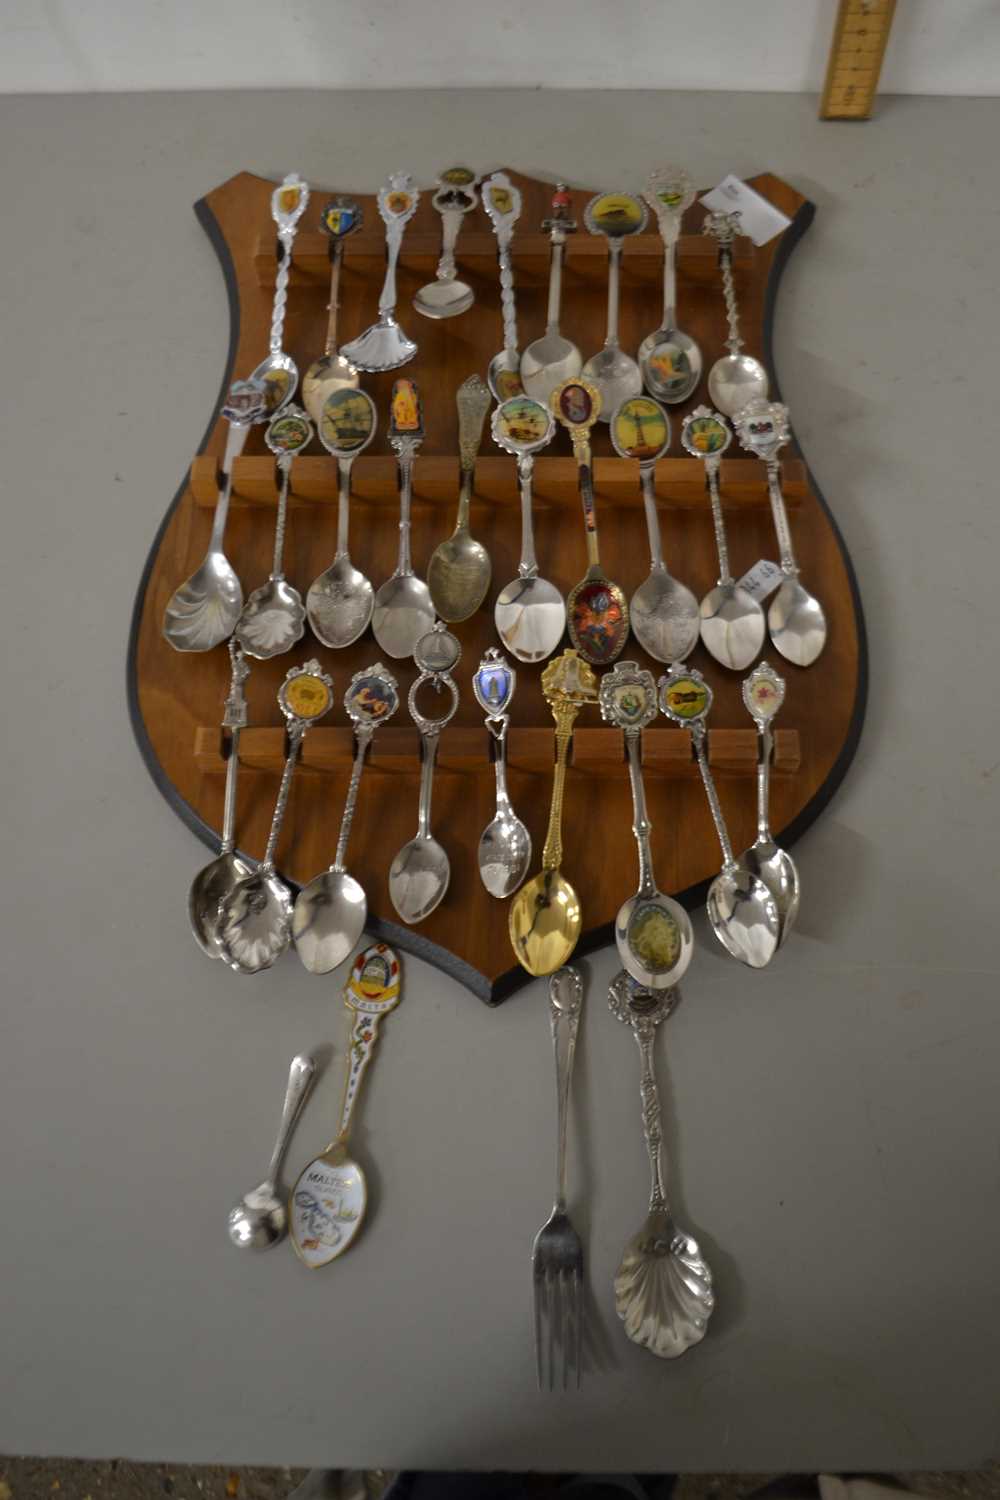 A display rack of crested spoons